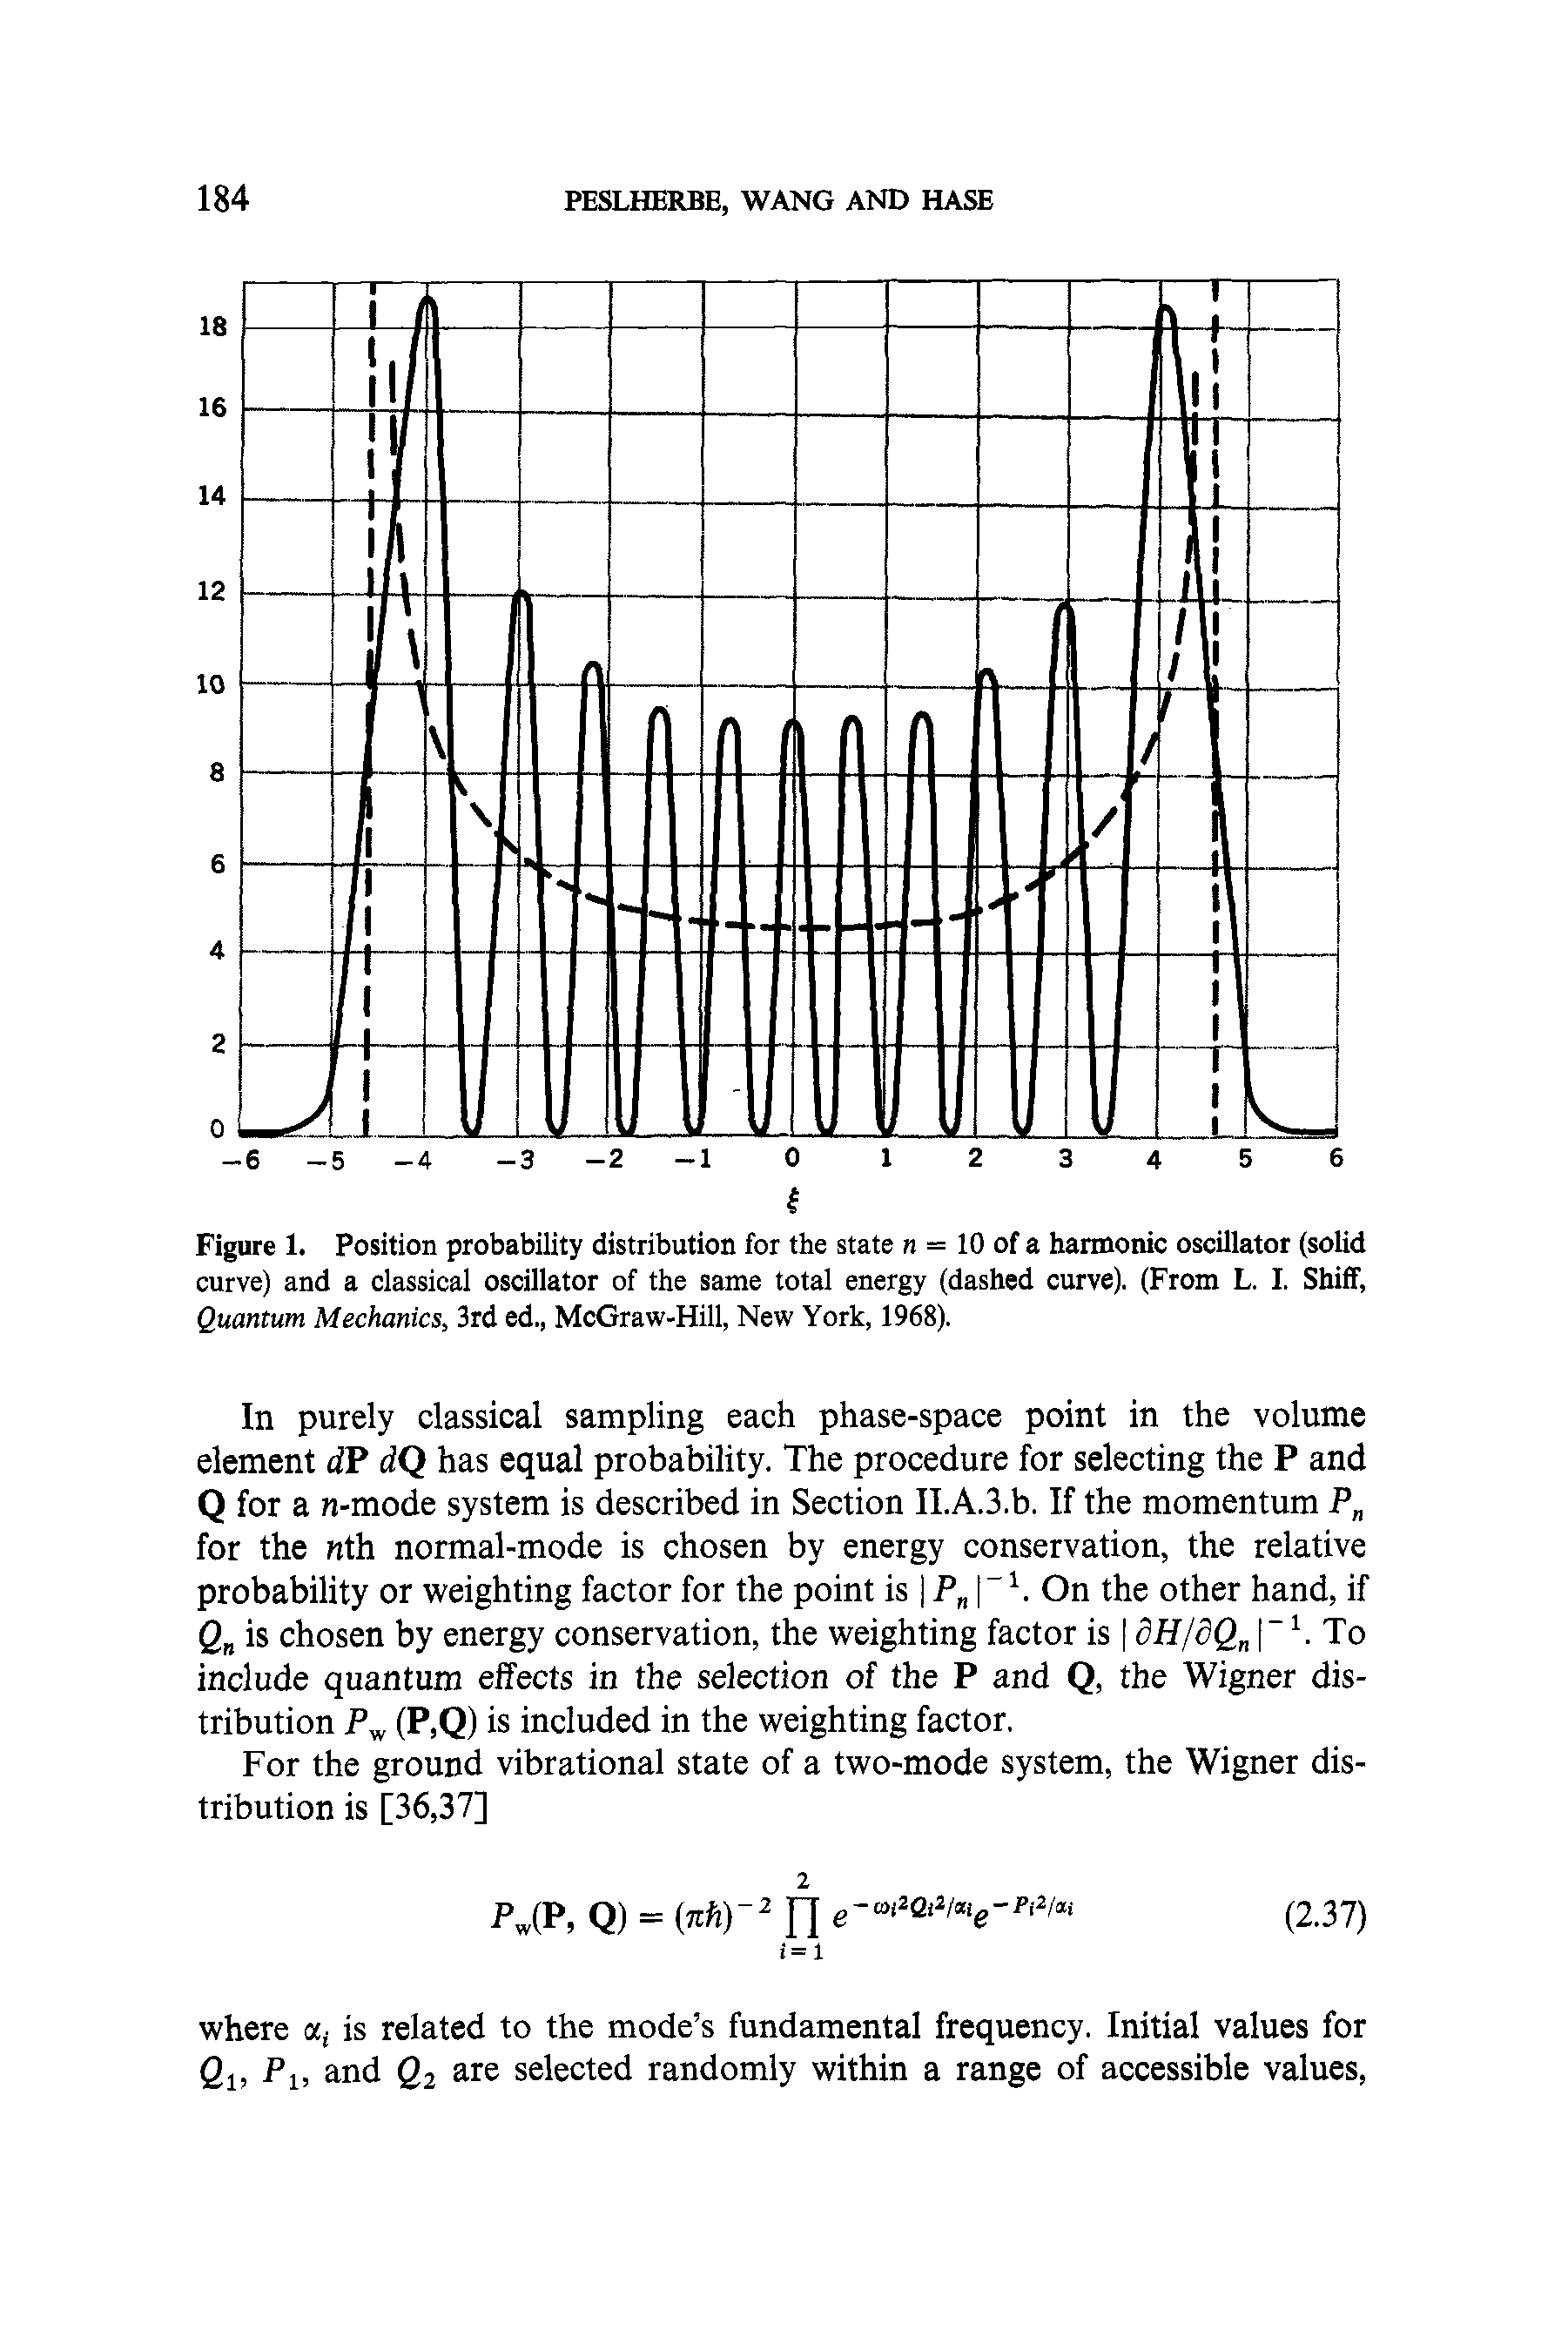 Figure 1. Position probability distribution for the state n = 10 of a harmonic oscillator (solid curve) and a classical oscillator of the same total energy (dashed curve). (From L. I. Shiff, Quantum Mechanics, 3rd ed., McGraw-Hill, New York, 1968).